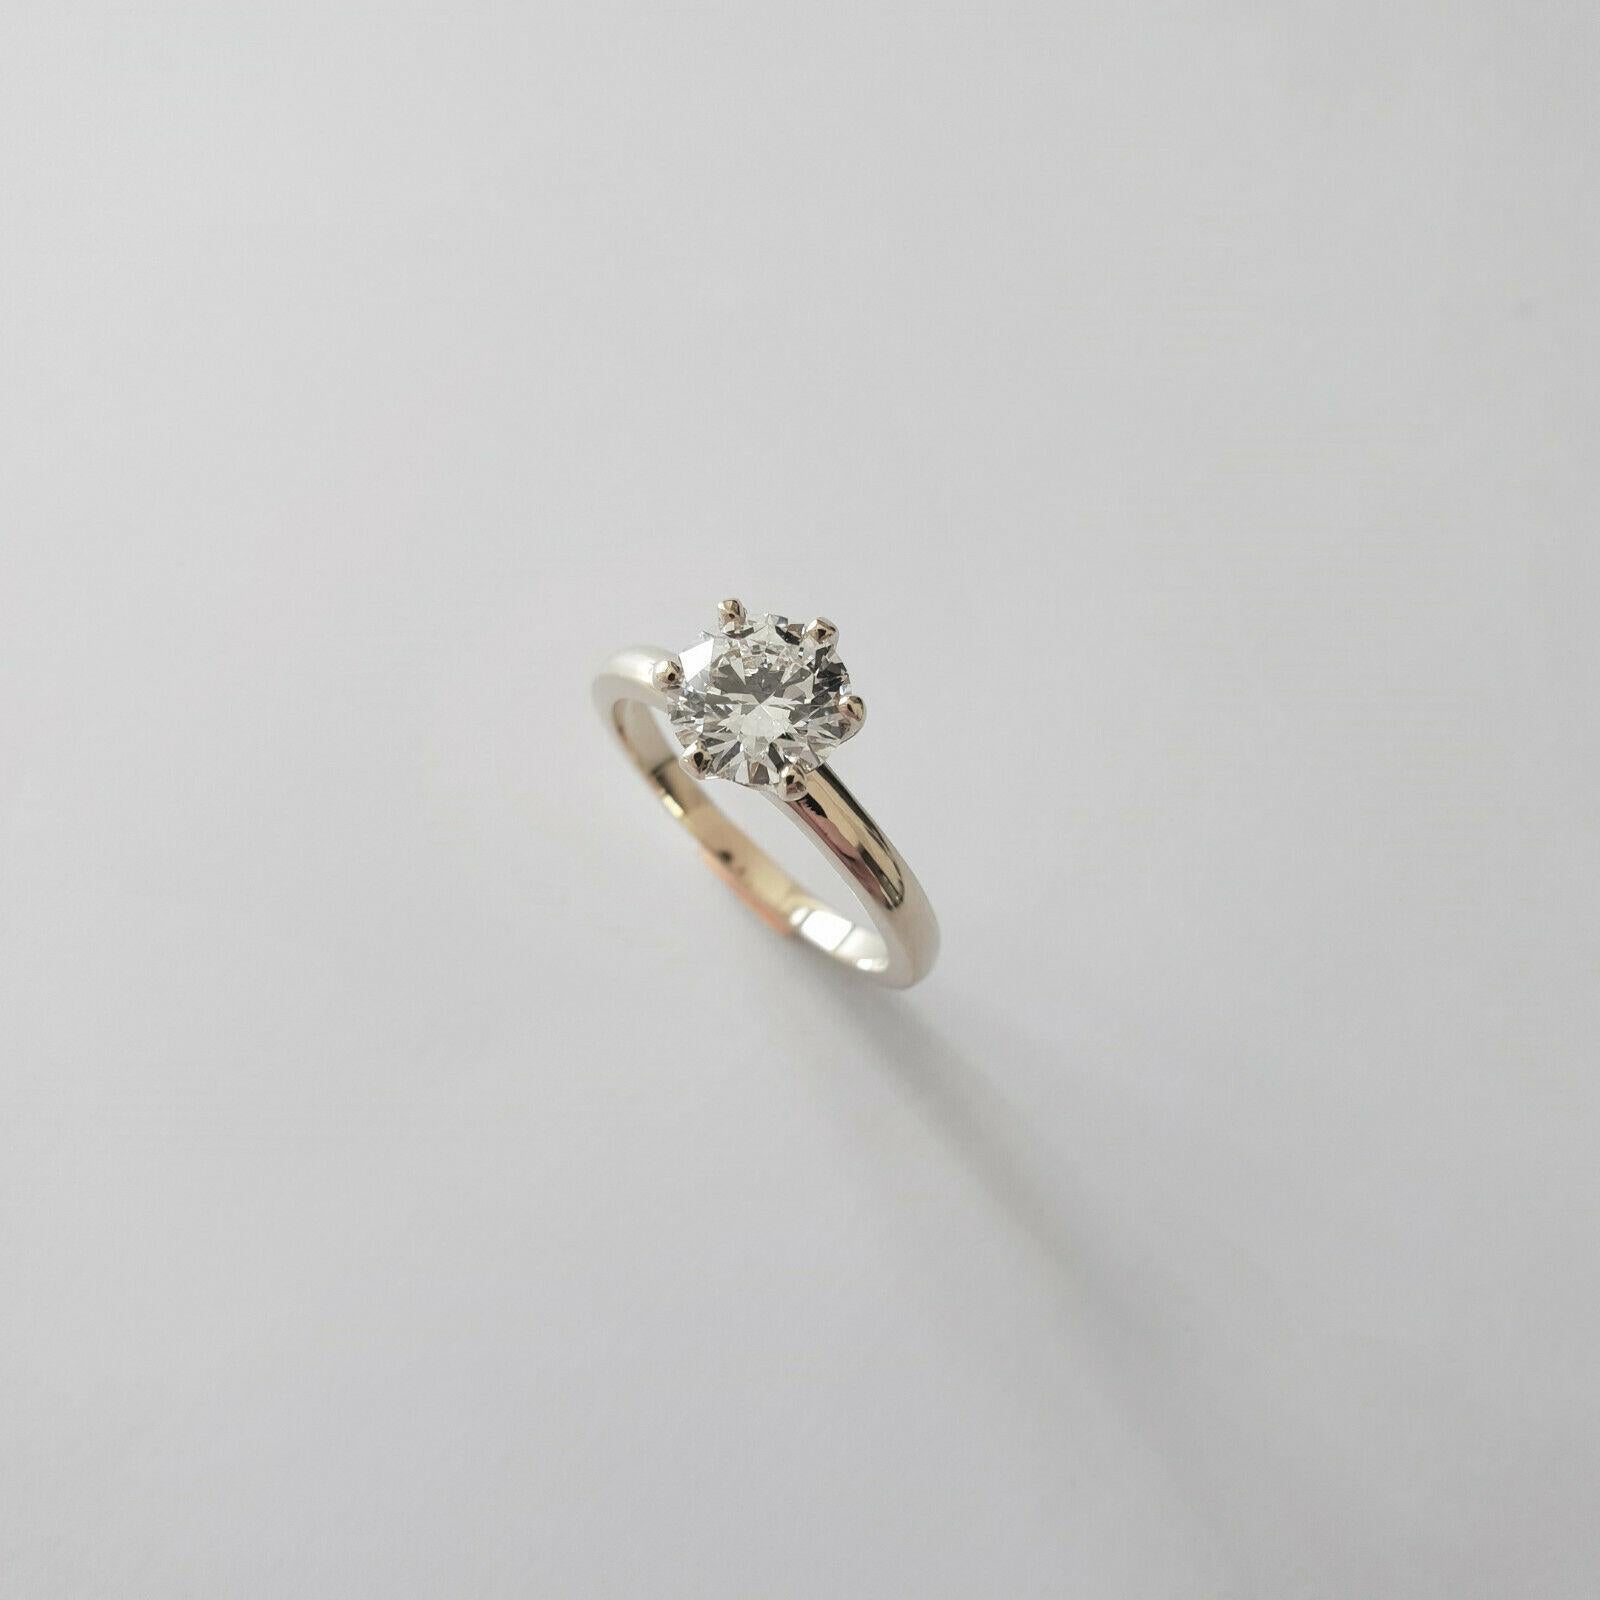 GIA Certified Diamond 0.5-0.55 F/SI1 Solitaire Ring 750 Gold in 6 Prong Setting

Solitaire Diamond Ring in Six Prong Setting. 
High Gloss Finish, Fine Solitaire Ring in 18k Gold. Any Ring Size possible. 

Bigger Diamond Sizes possible on demand. 

5